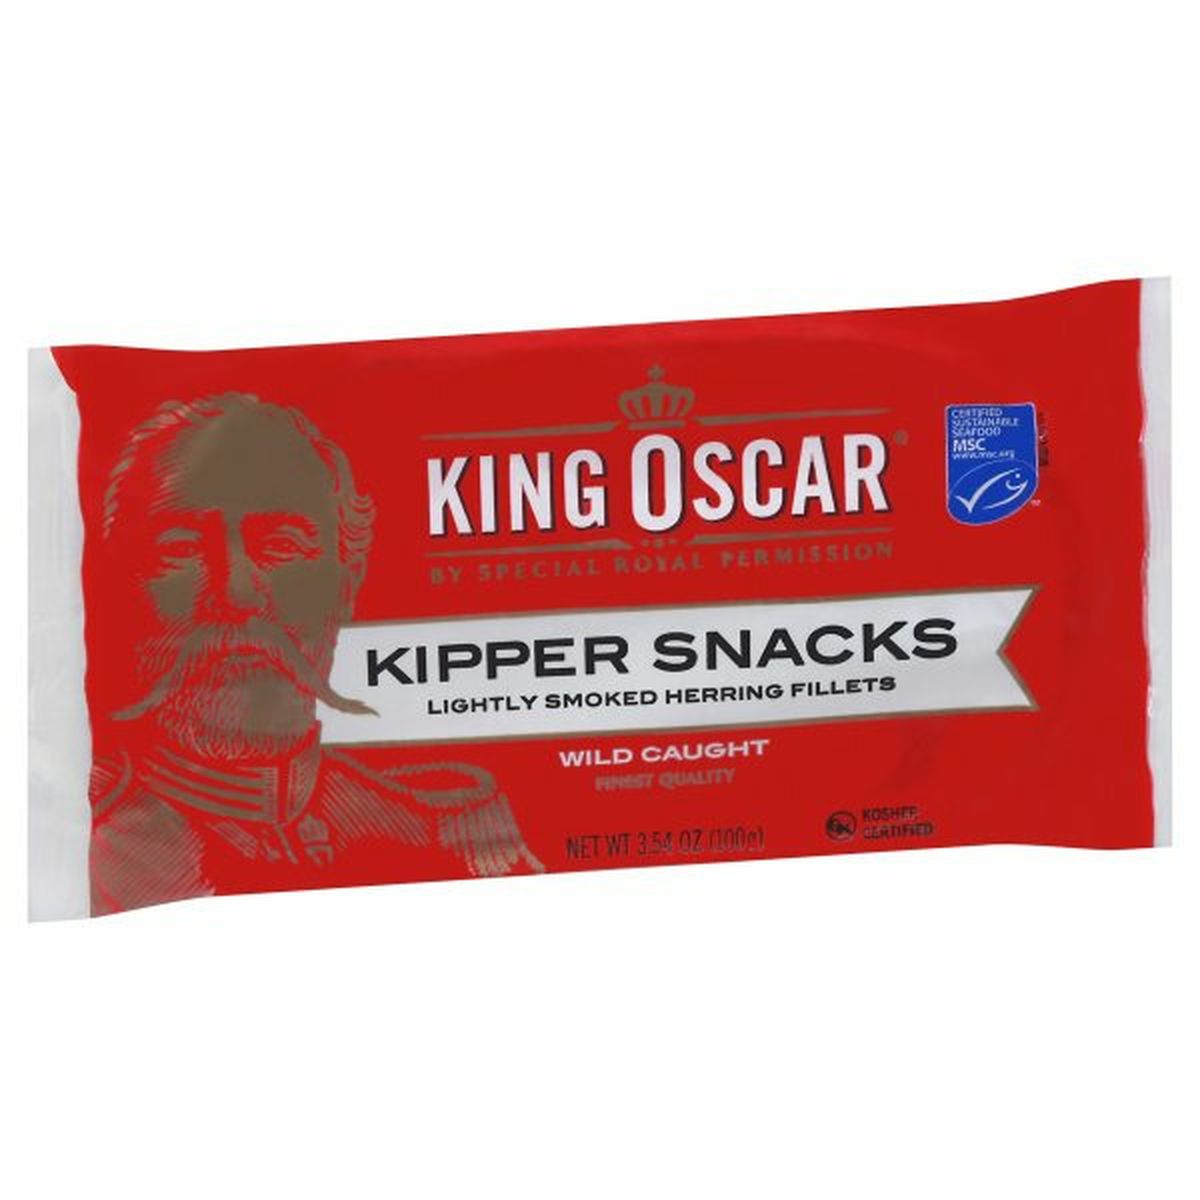 Calories in King Oscar Kipper Snacks, Wild Caught, Lightly Smoked Herring Fillets